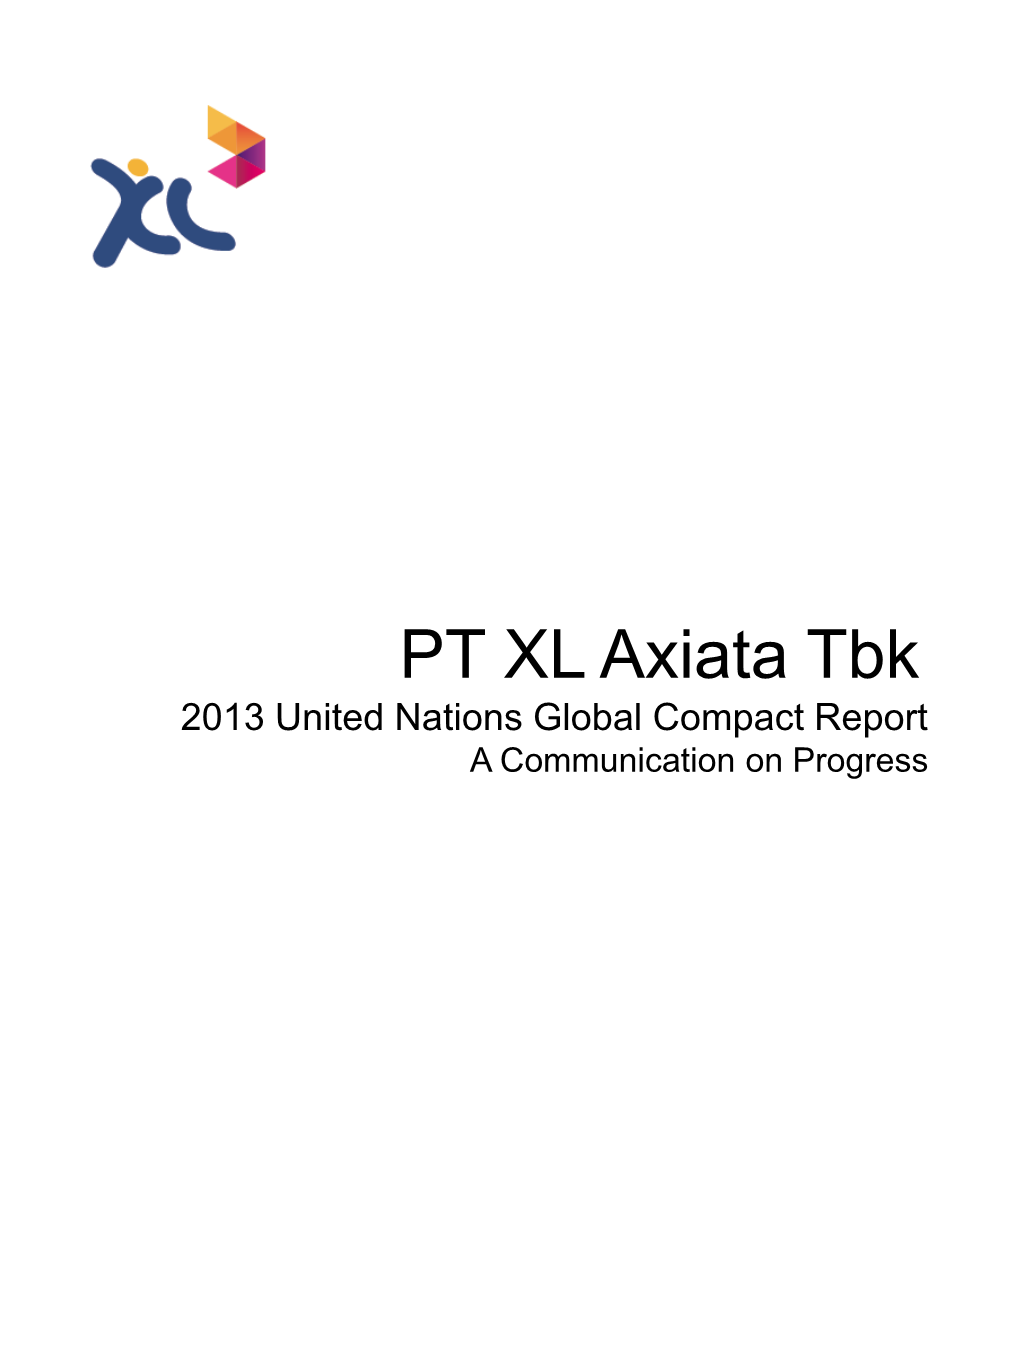 PT XL Axiata Tbk 2013 United Nations Global Compact Report a Communication on Progress Contents